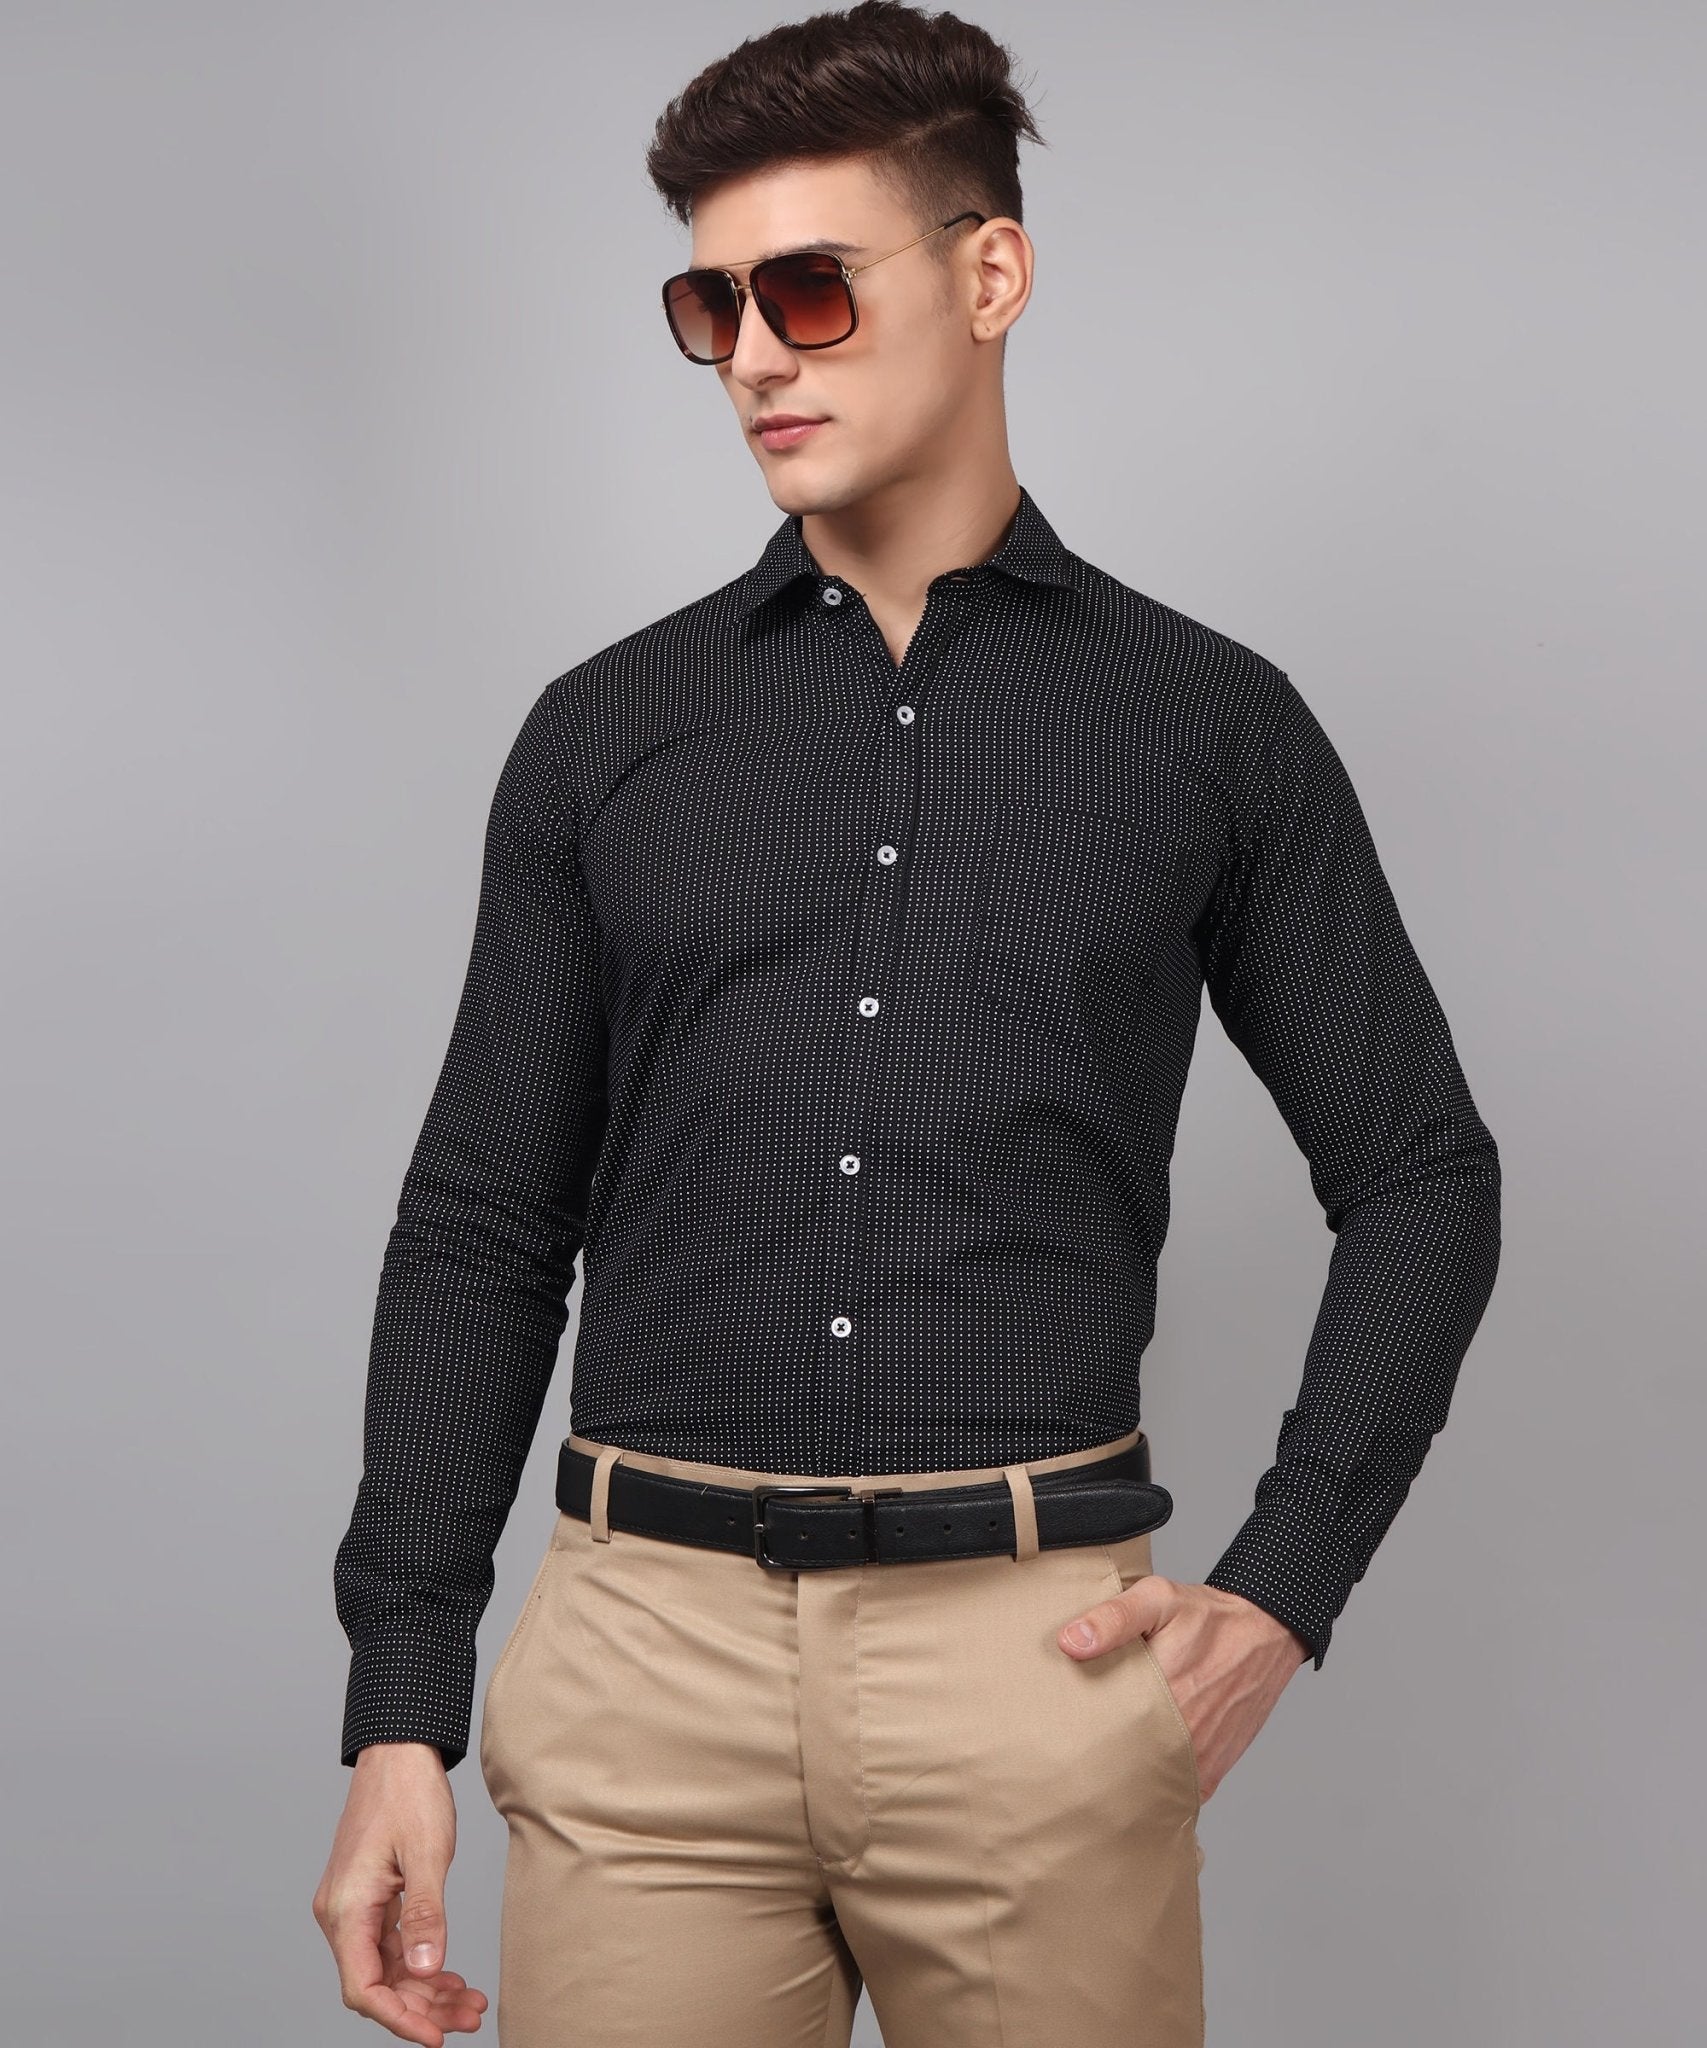 TryBuy Premium Pure Cotton Dot Printed Casual/Formal Black Shirt for Men - TryBuy® USA🇺🇸